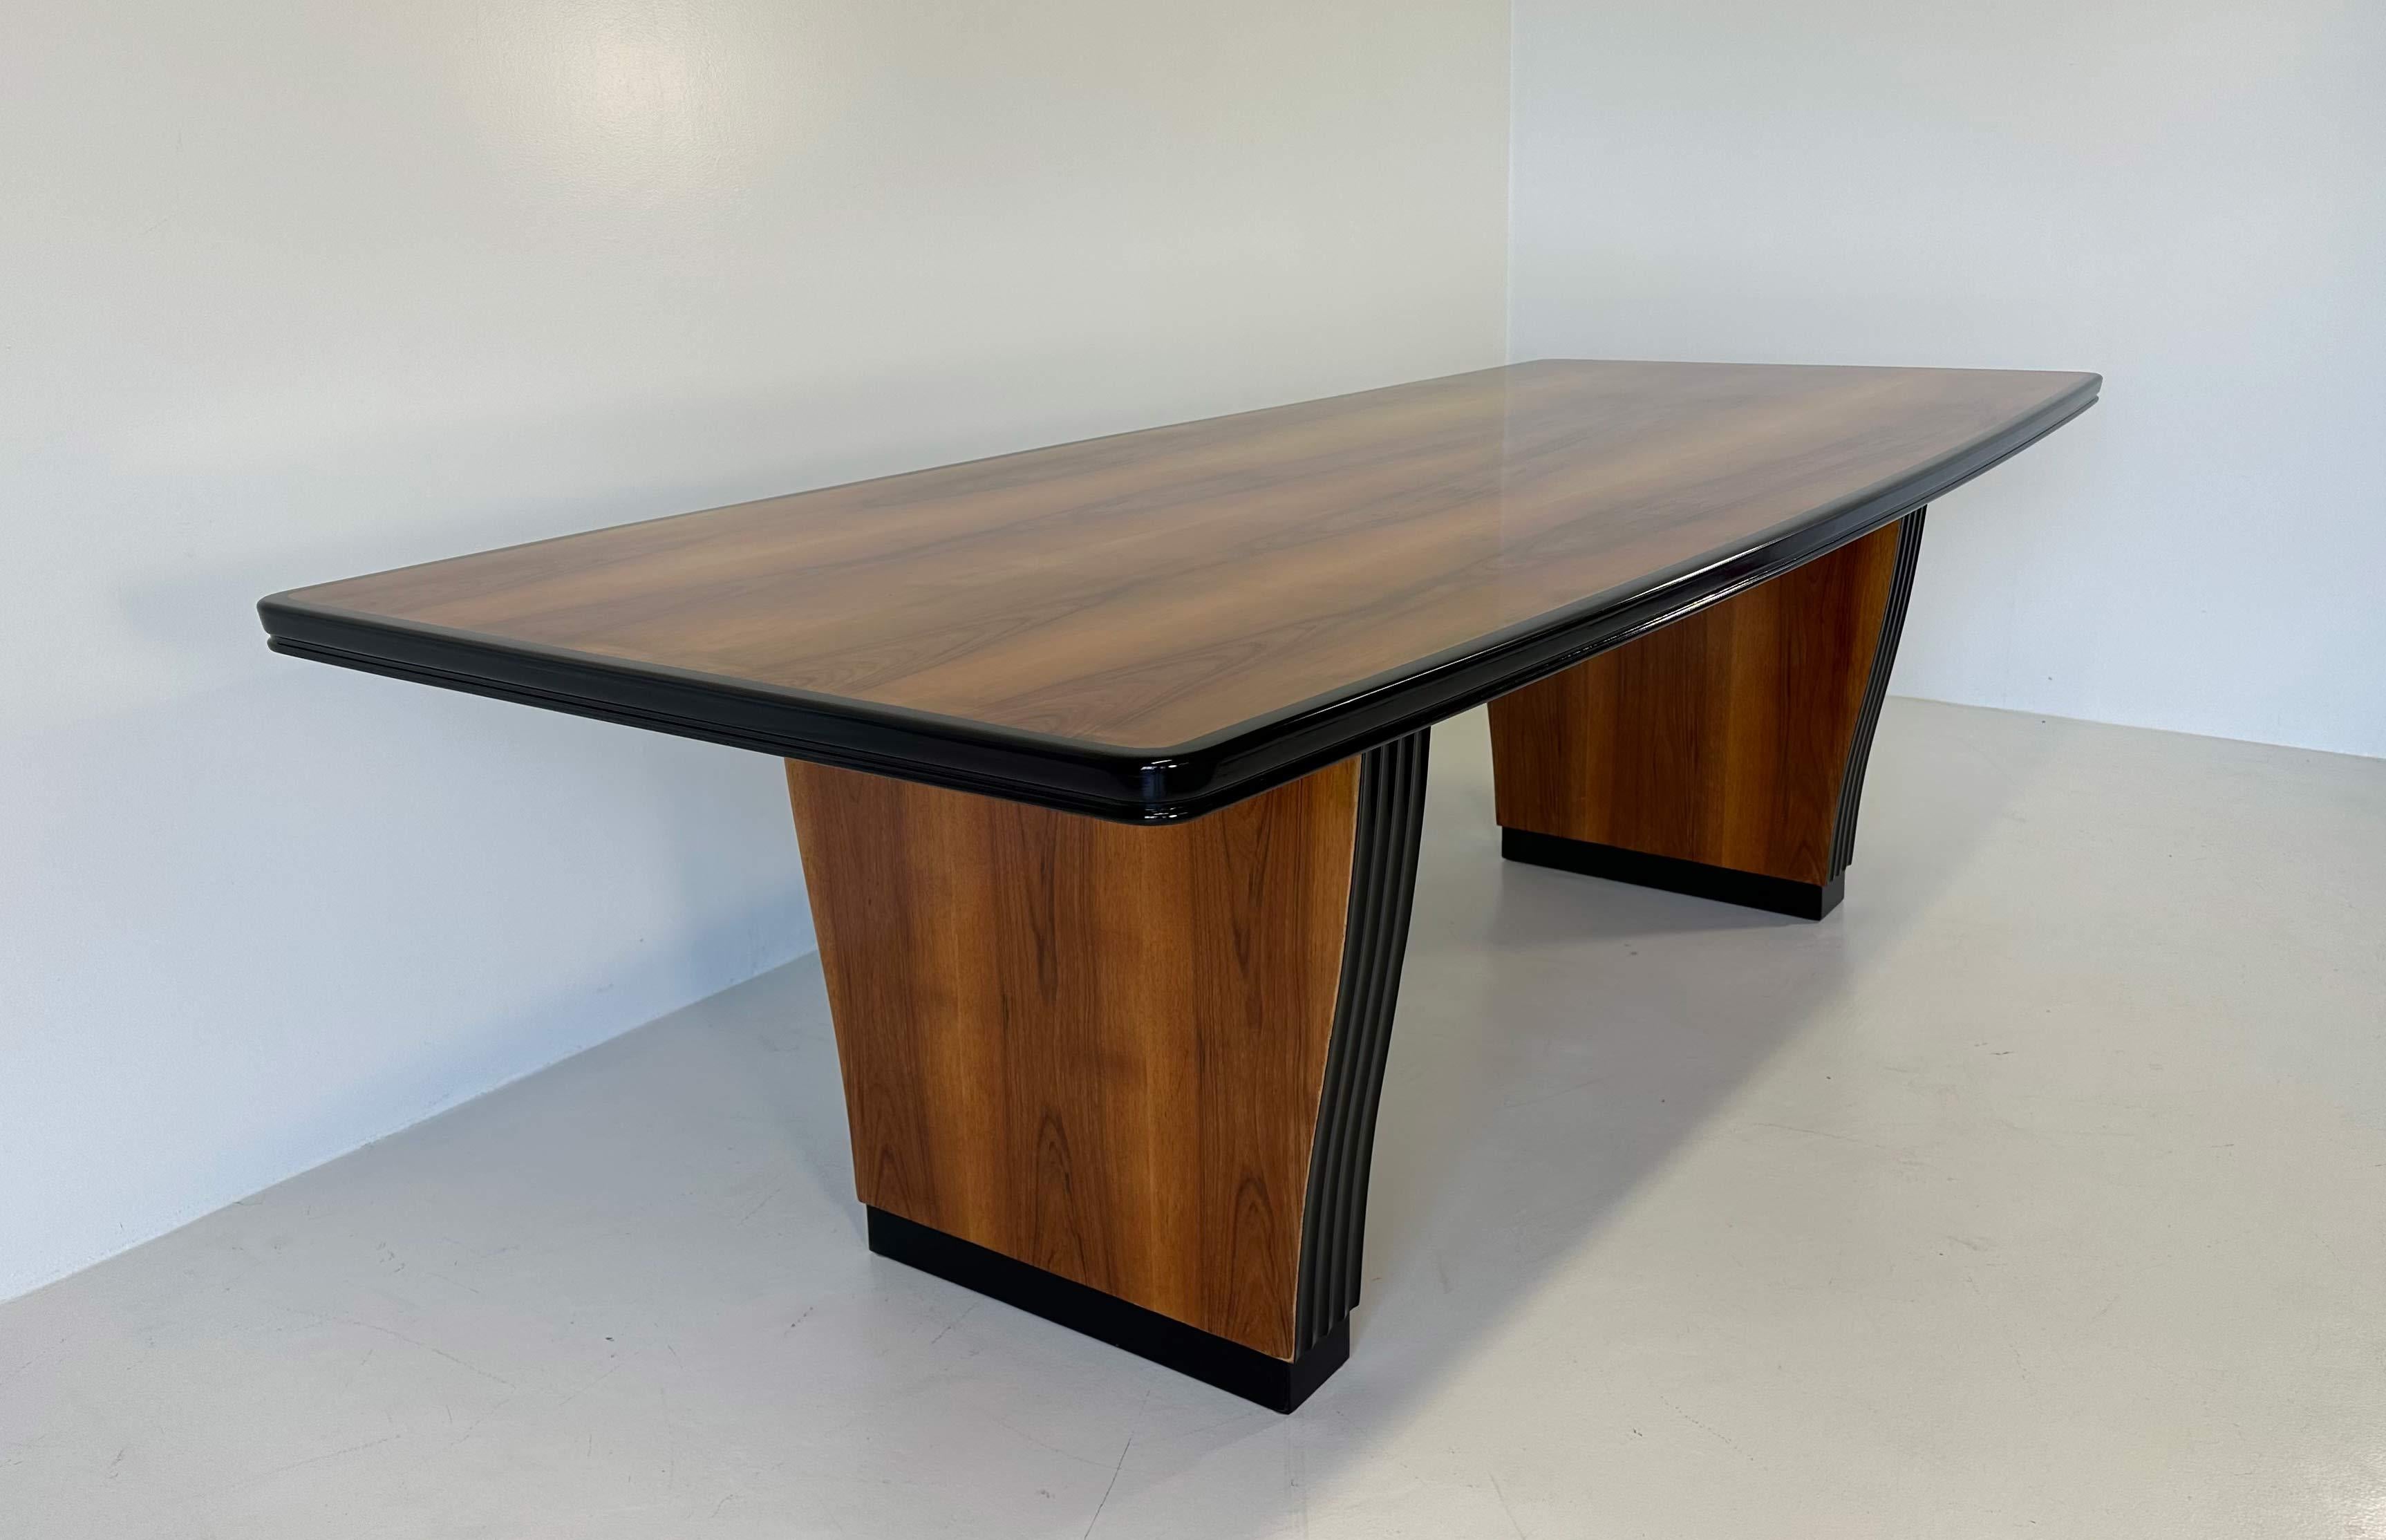 Italian Art Deco Walnut and Black Lacquer Table, 1930s For Sale 1